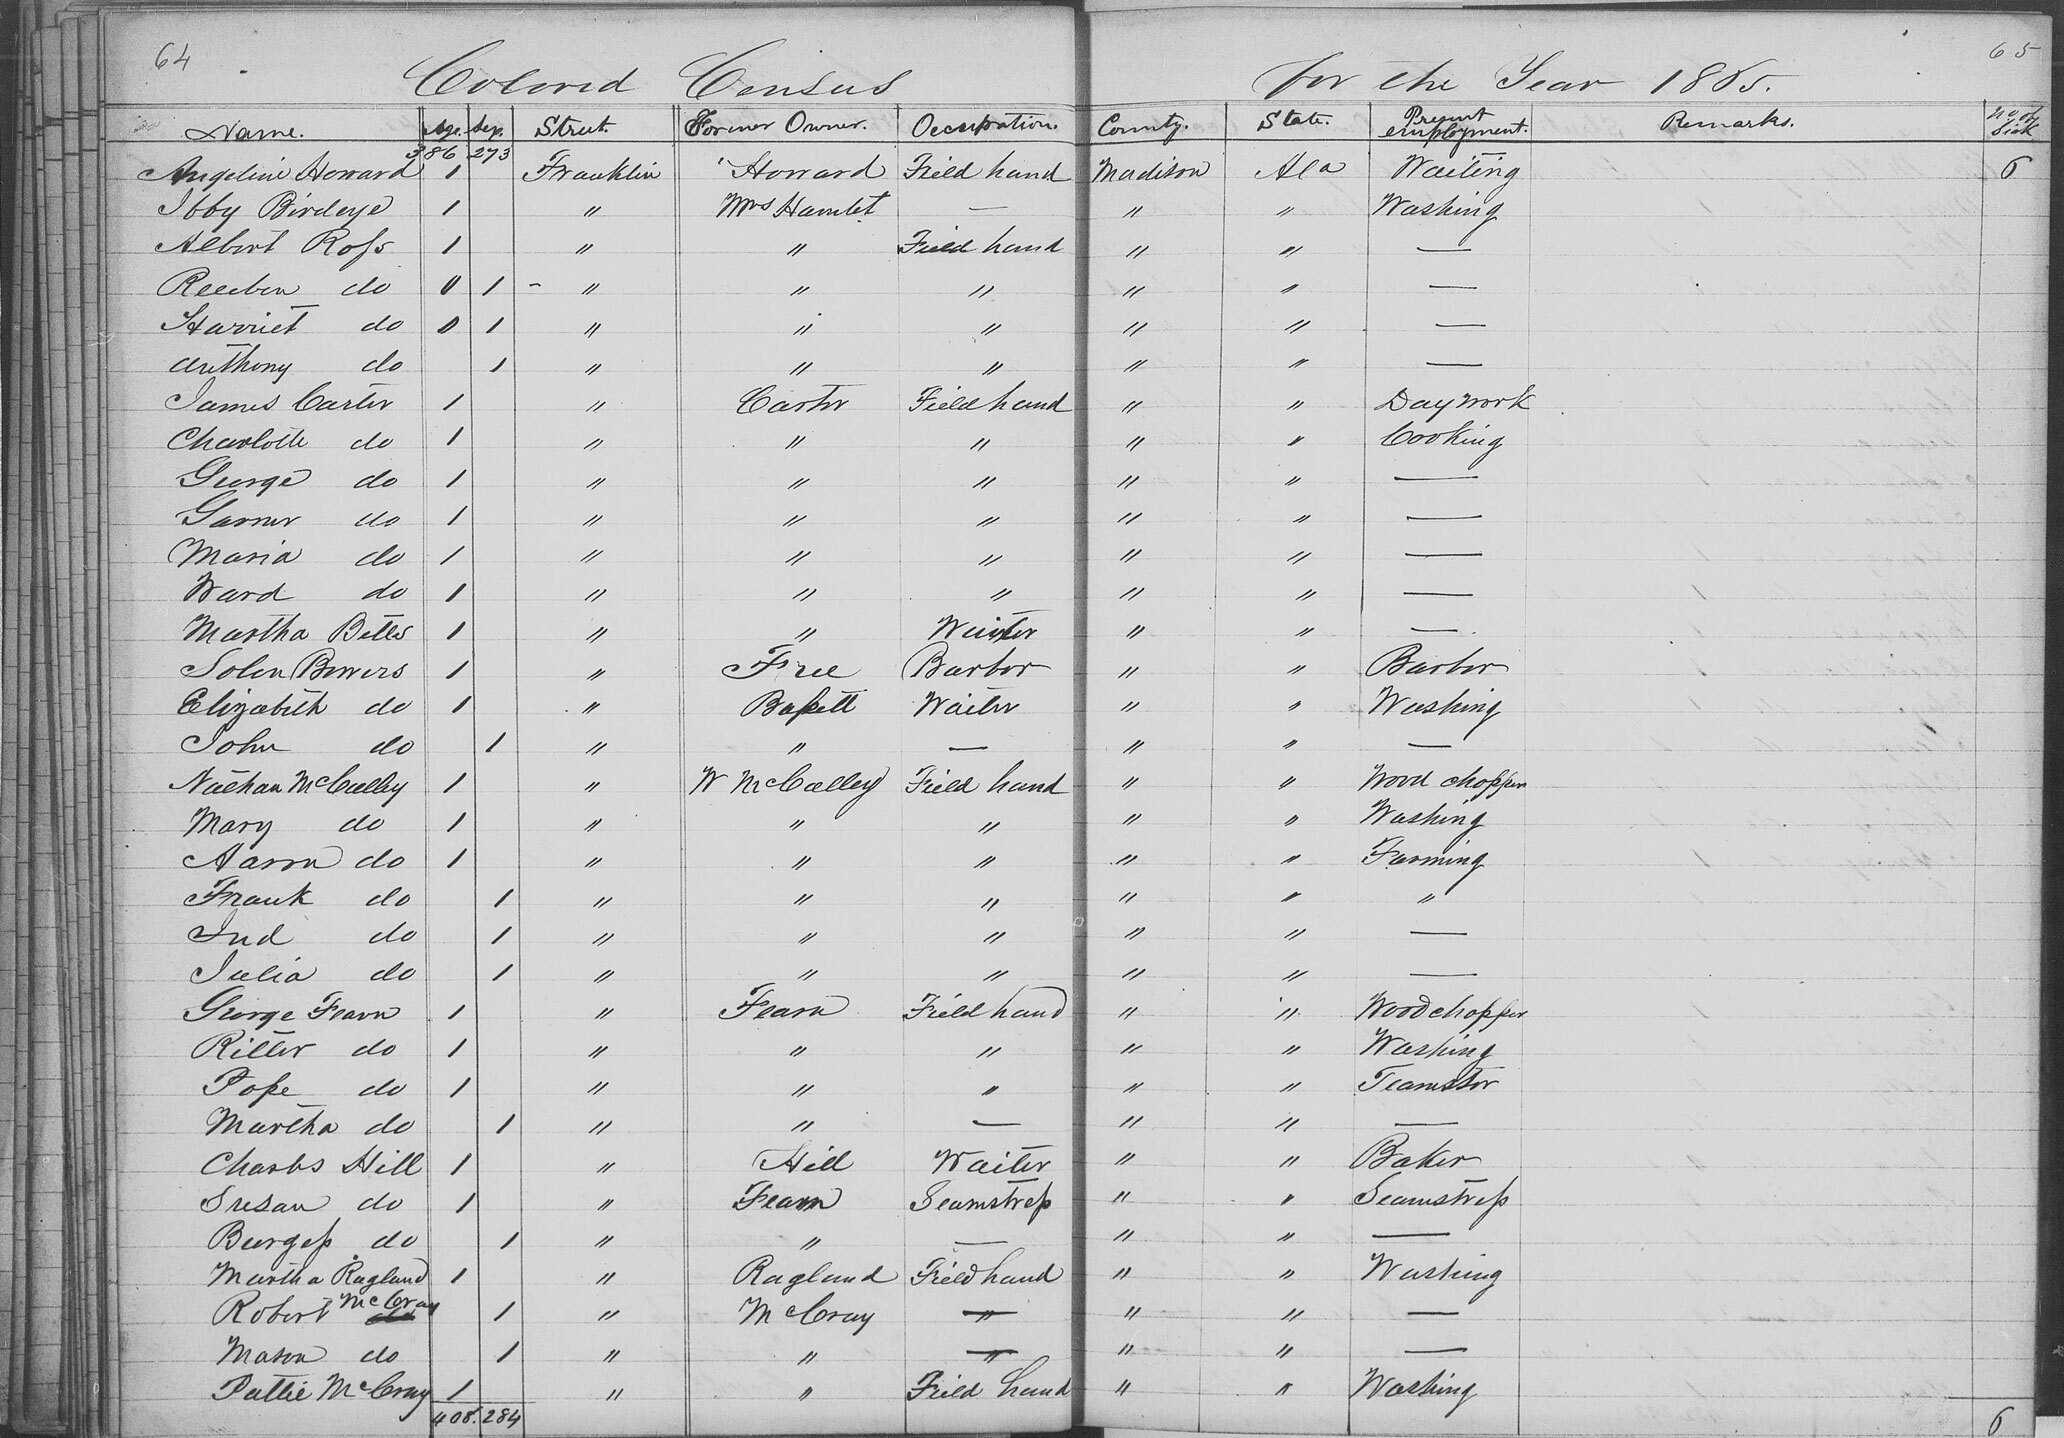 Two pages of hand written Athens and Huntsville AL census